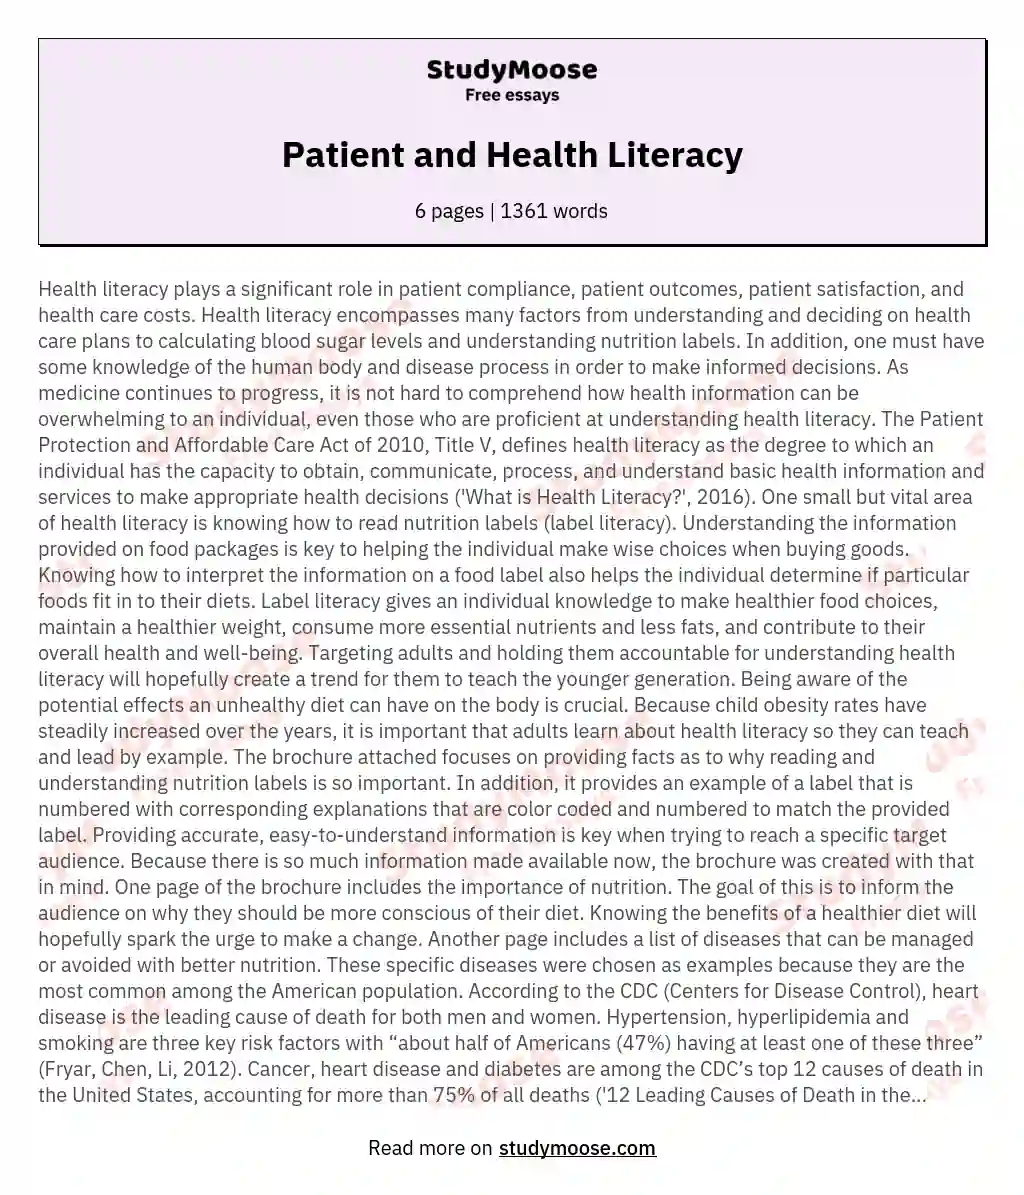 Patient and Health Literacy essay